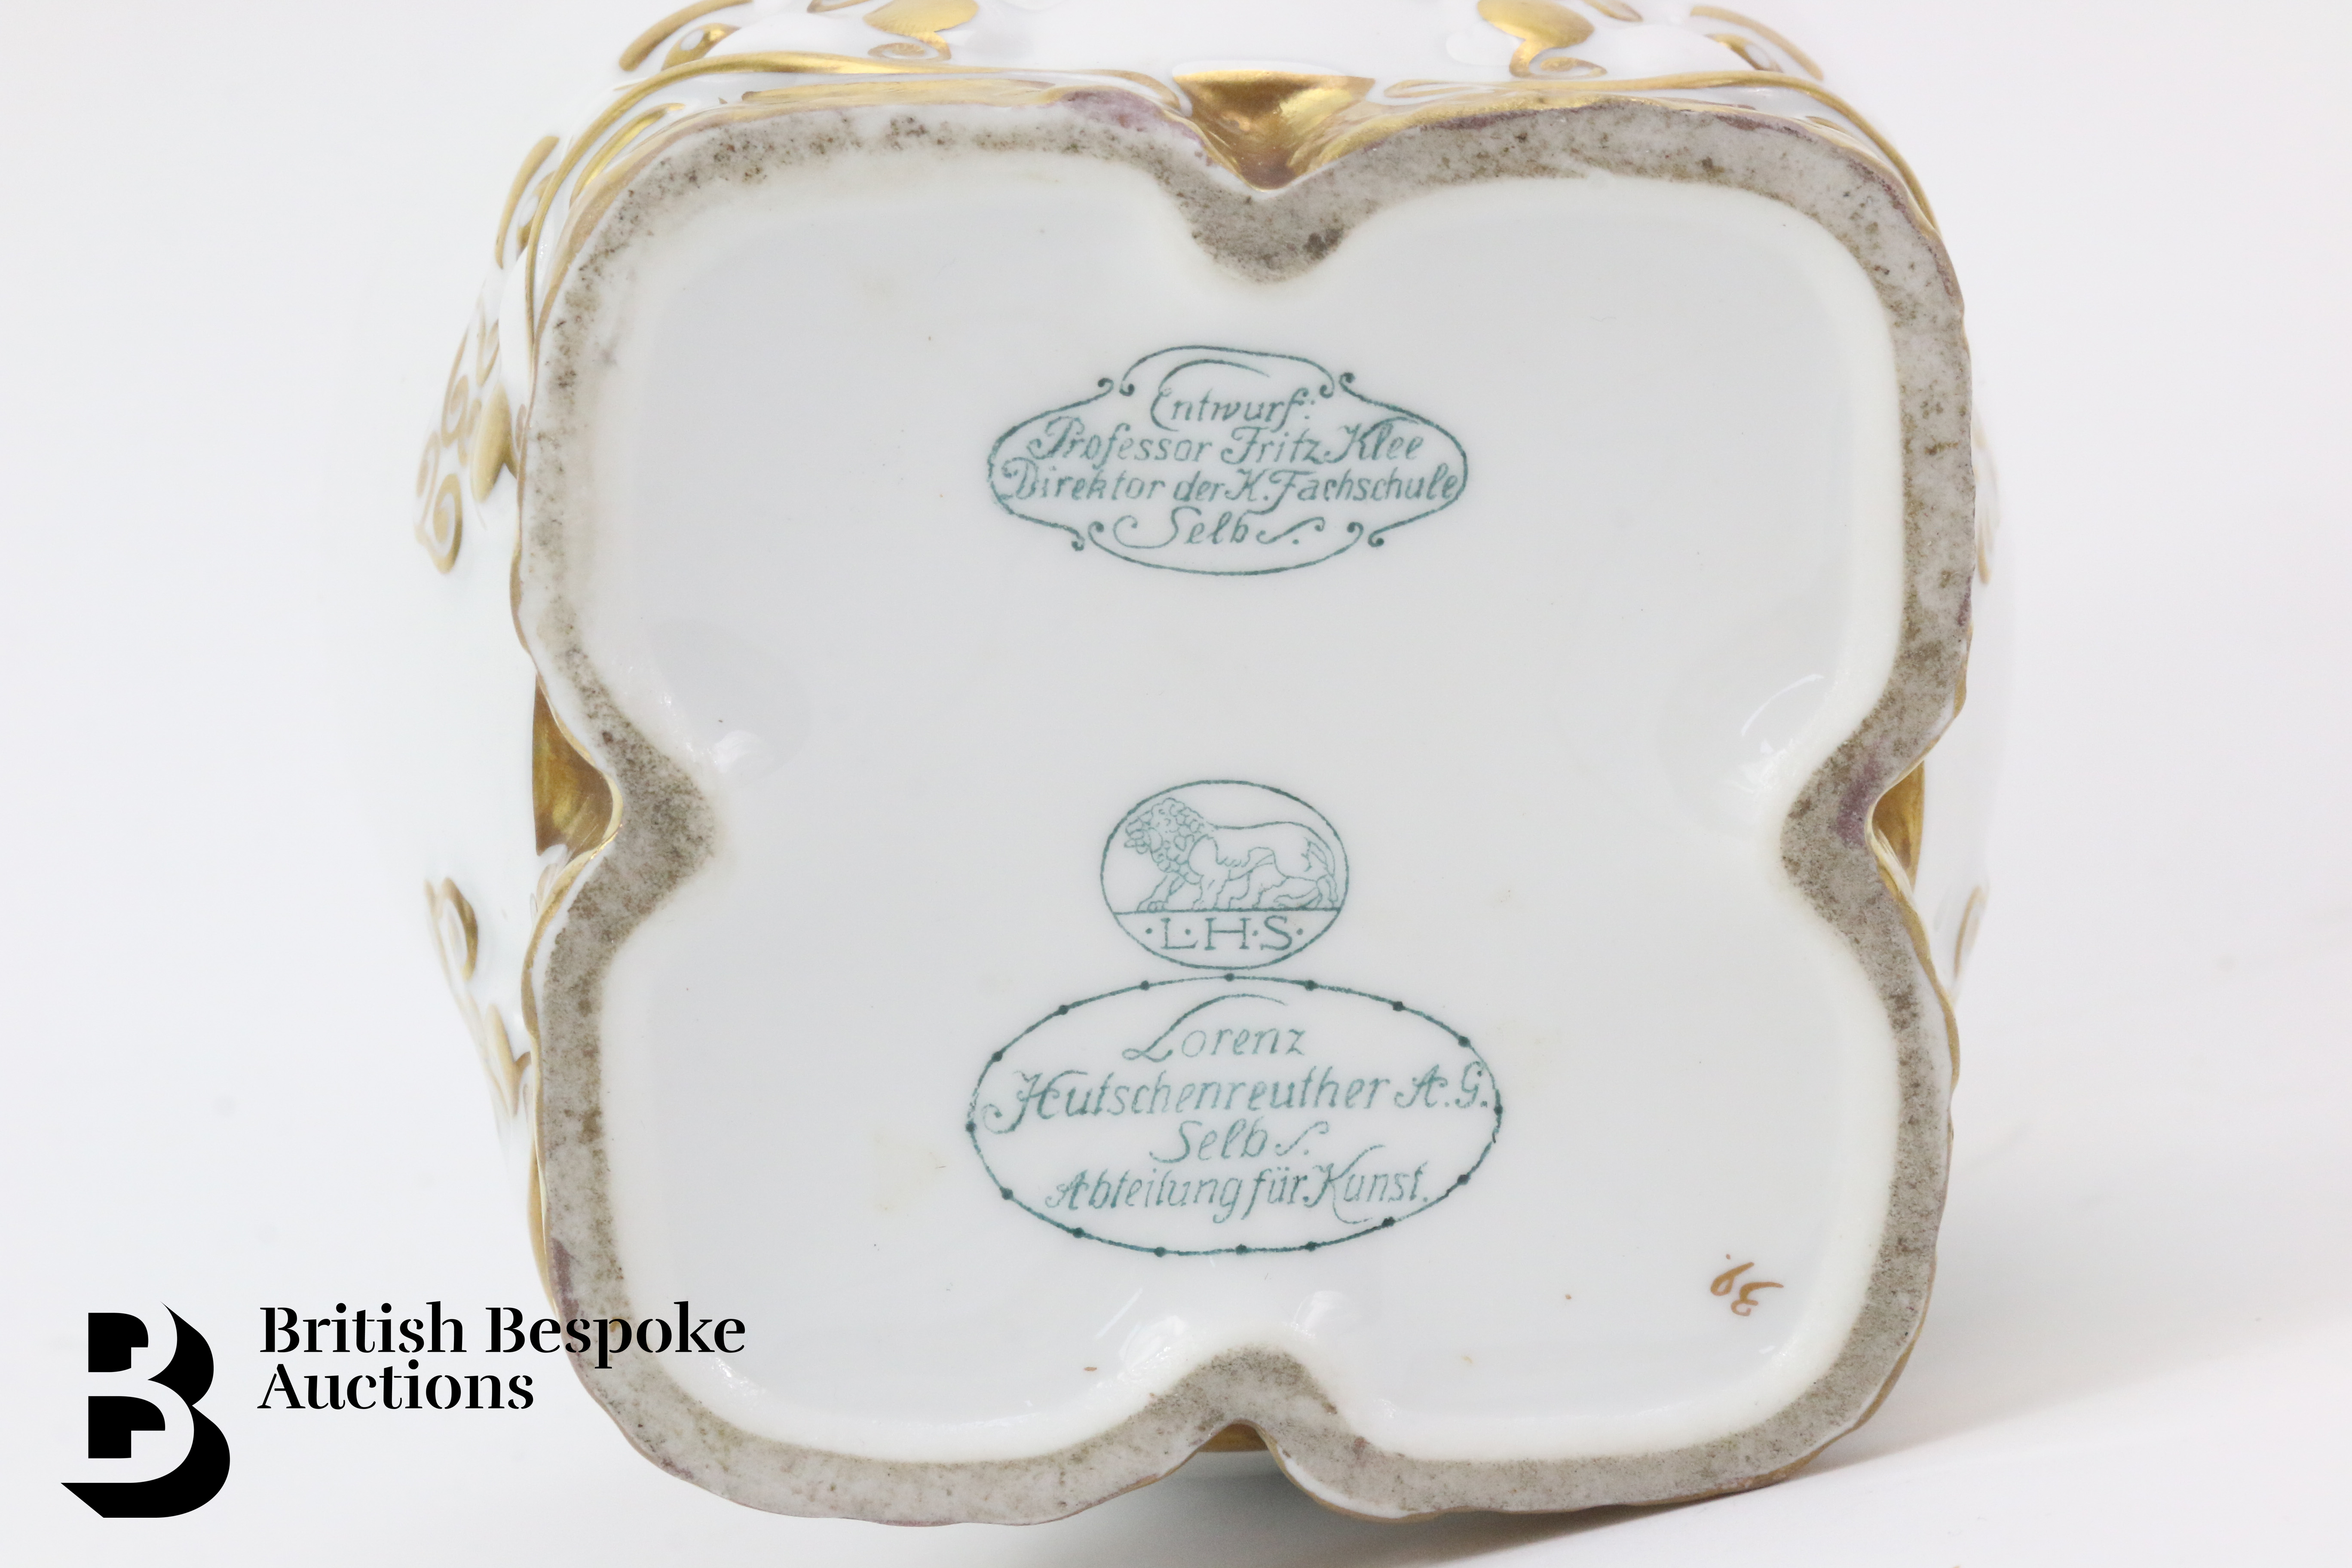 Hutschenreuther Porcelain Jar and Cover - Image 8 of 8